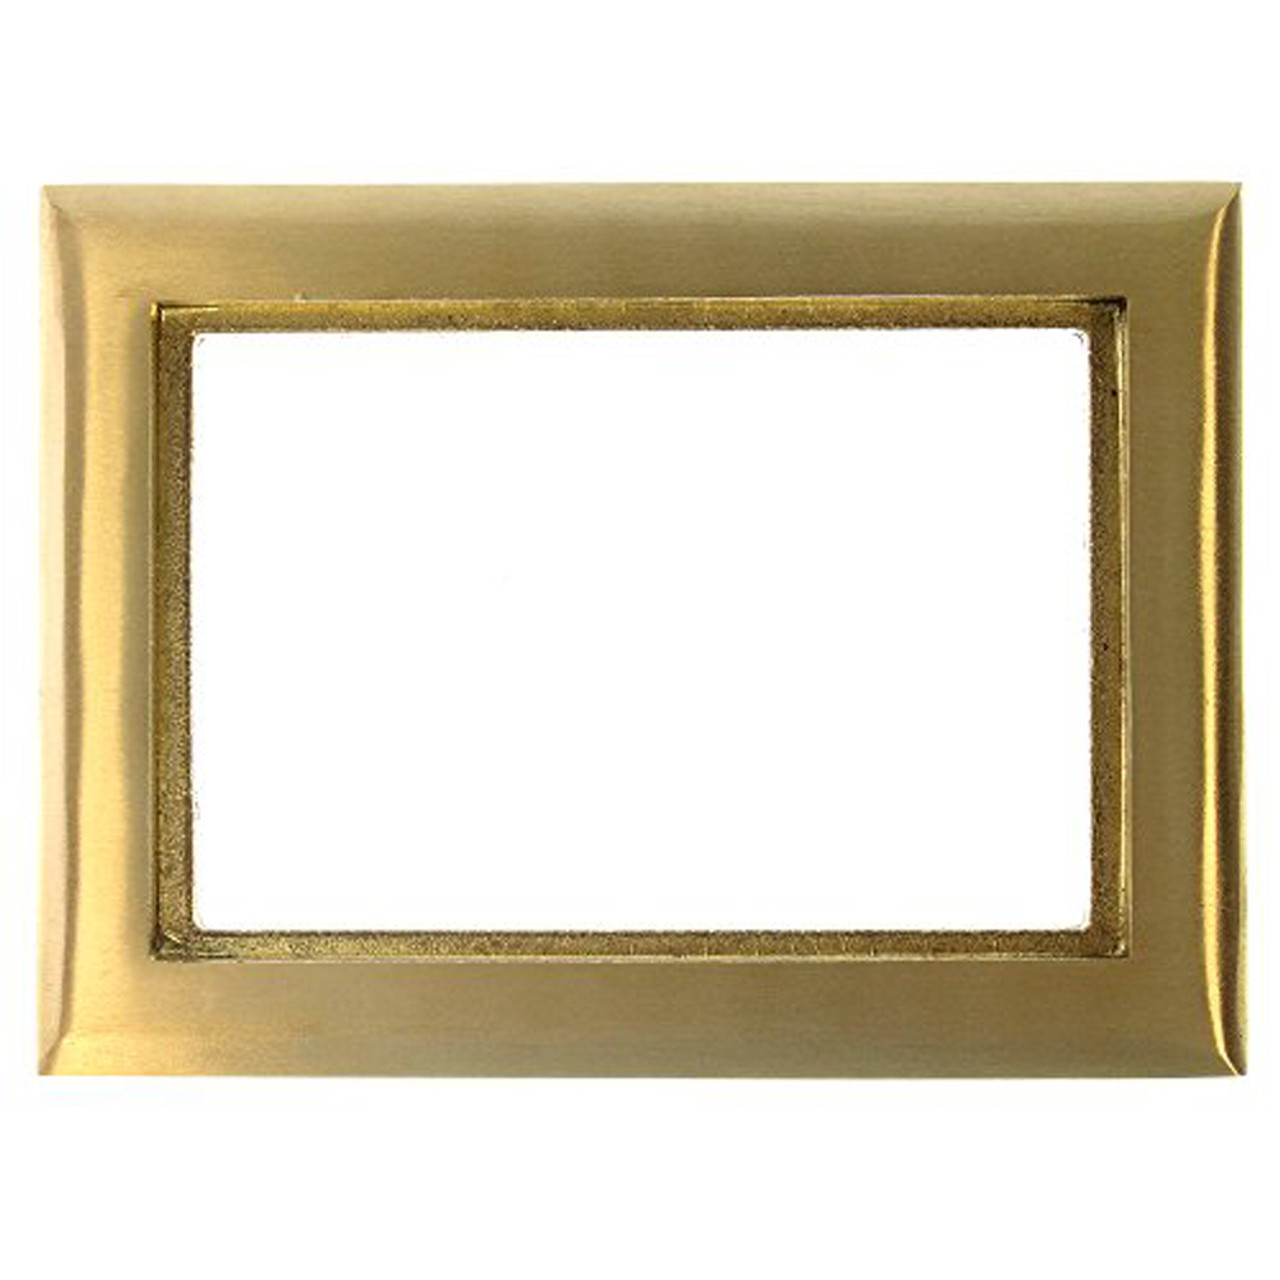 NEW HUBBELL SB3084 SCRUBSHIELD CARPET FLANGE BRASS TWO GANG RECTANGLE COVER 